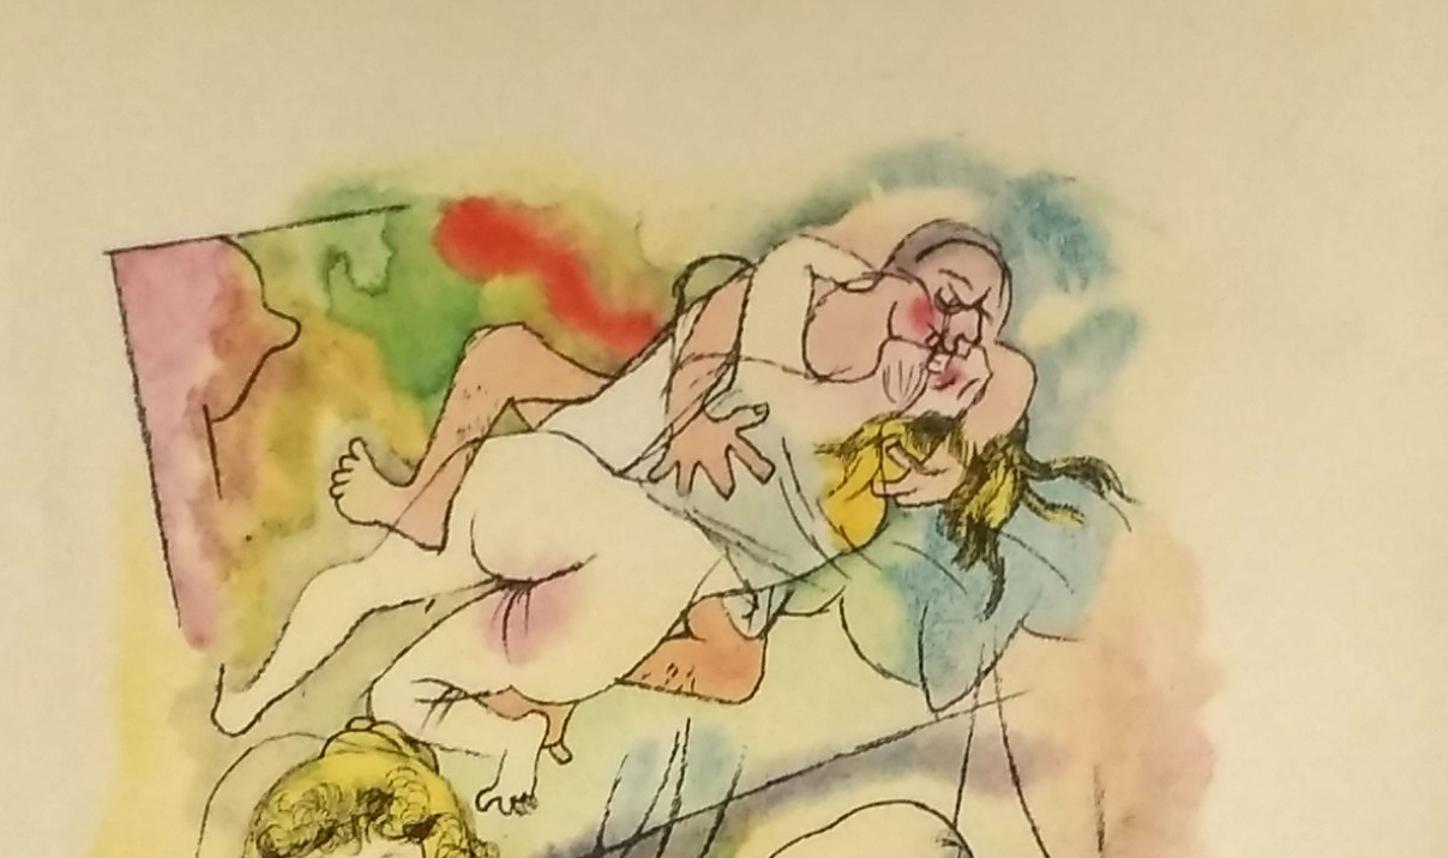 Color Lithograph on handmade paper from Ecce Homo, by George Grosz, 1922. Printed by Kunstanstalt Dr. Selle & Co. AG, Berlin. Published by Malik Verlag, 1923. Numbered in Roman numerals lower left. Here number V. Framed, under museum glass.